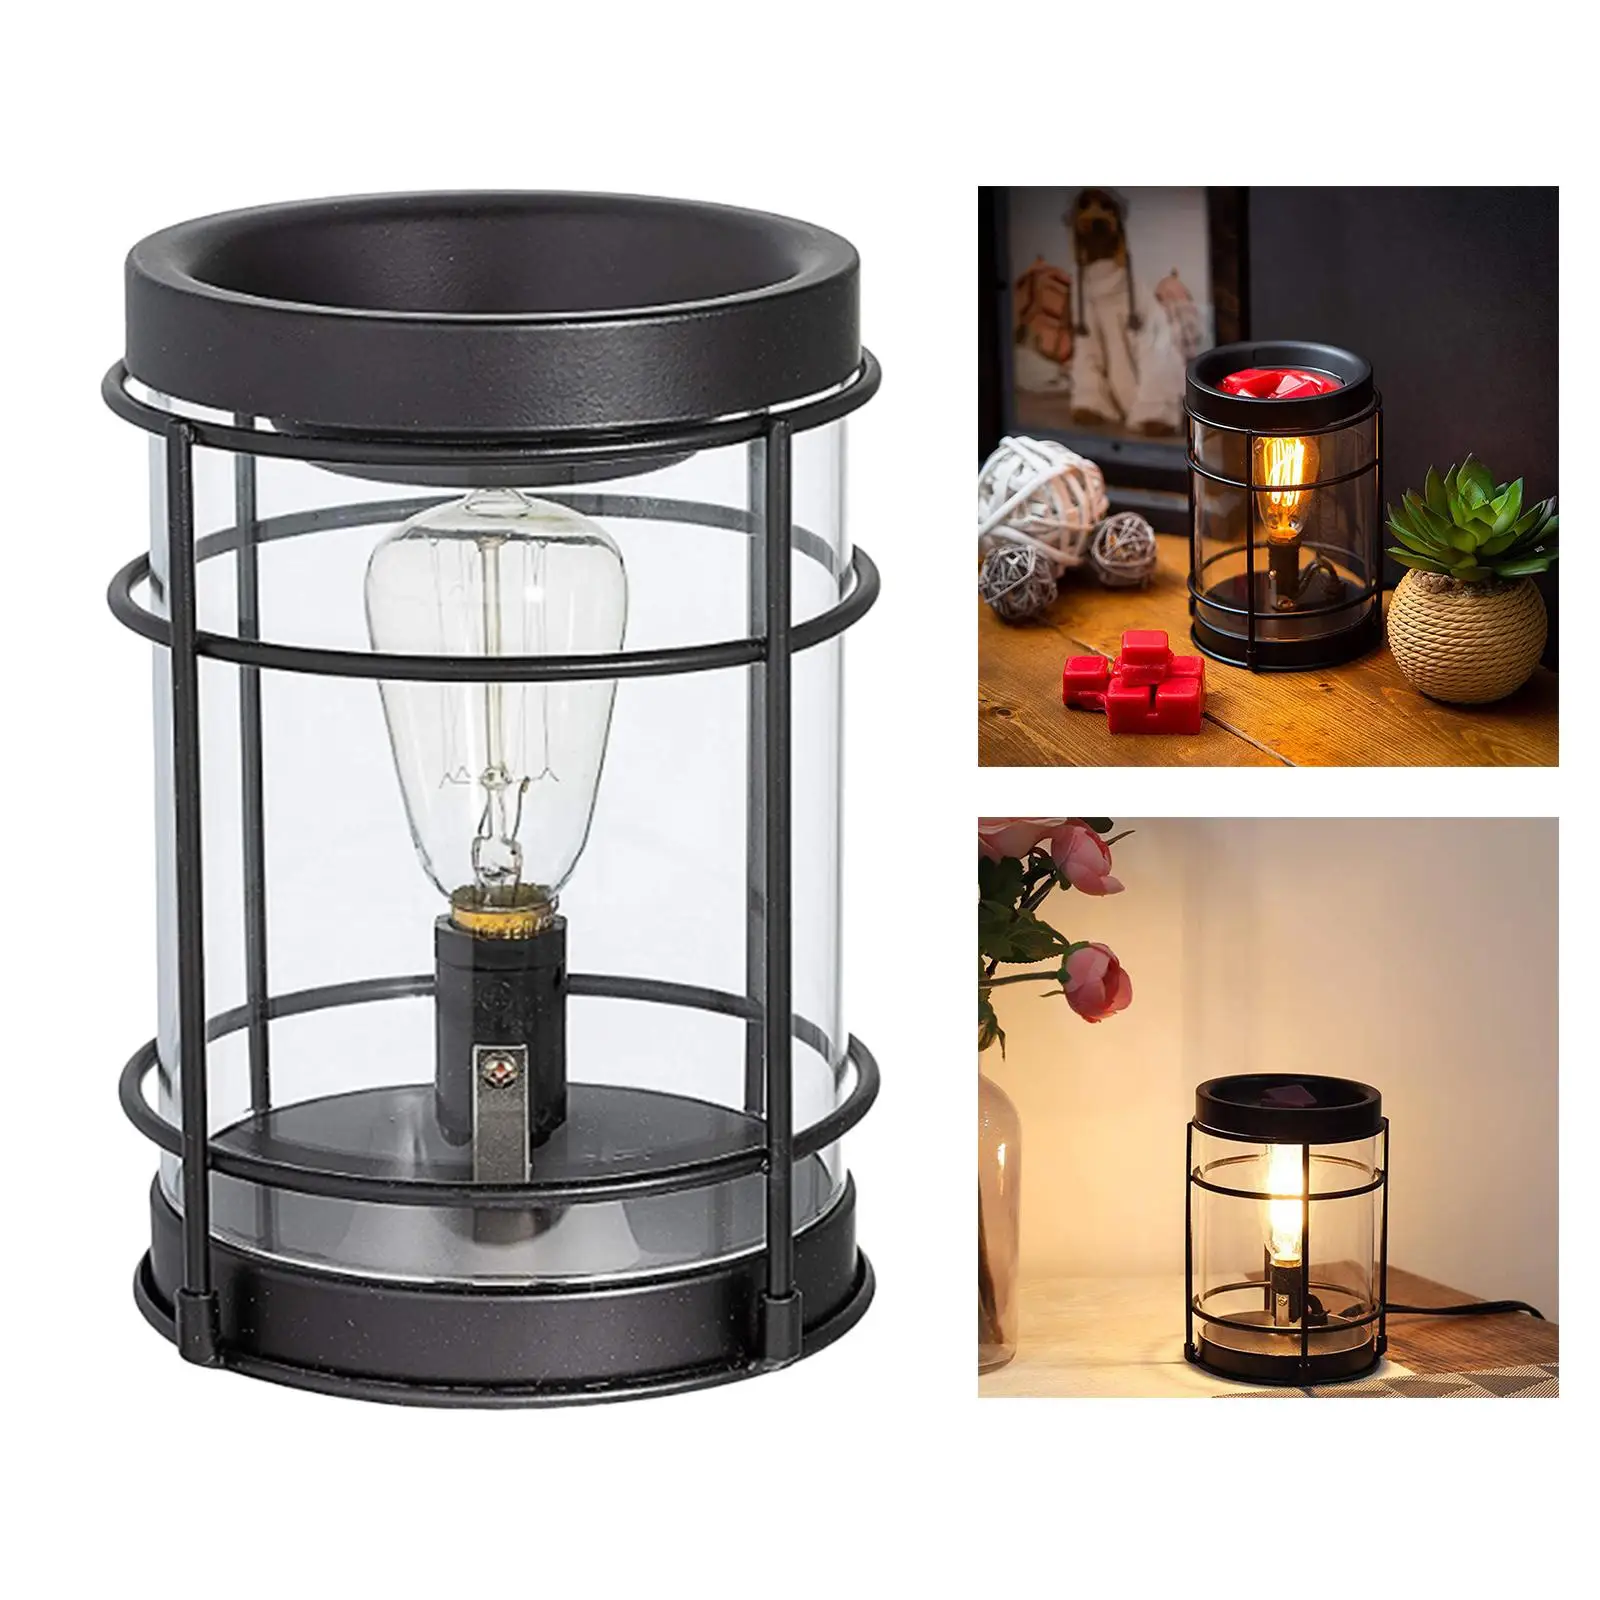 Electric Metal Edison Bulb for Home Office Essential Oils SPA Living Room Kitchen